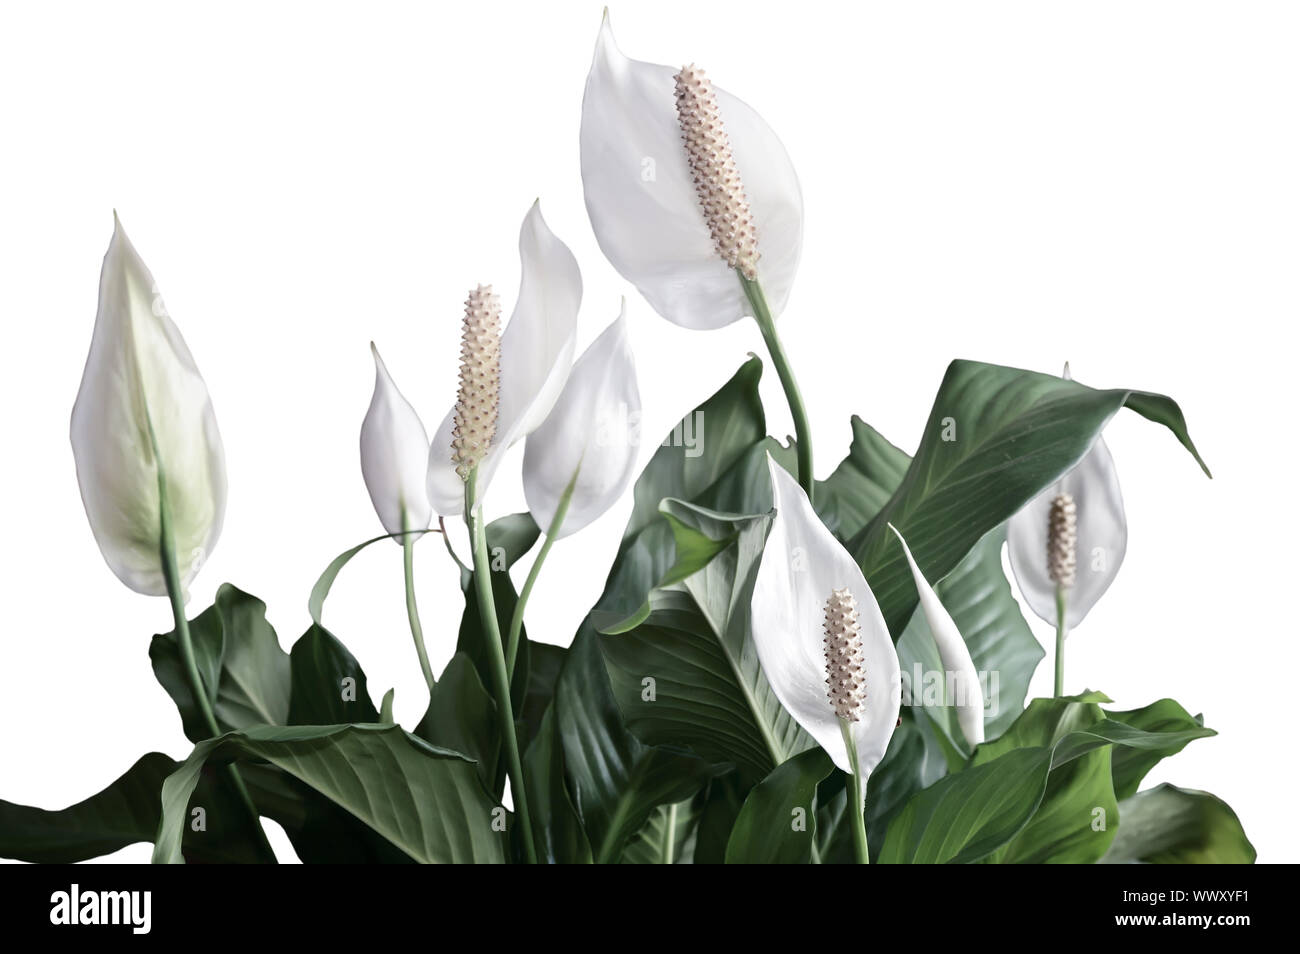 Blooming white flowers spathiphyllum. Stock Photo